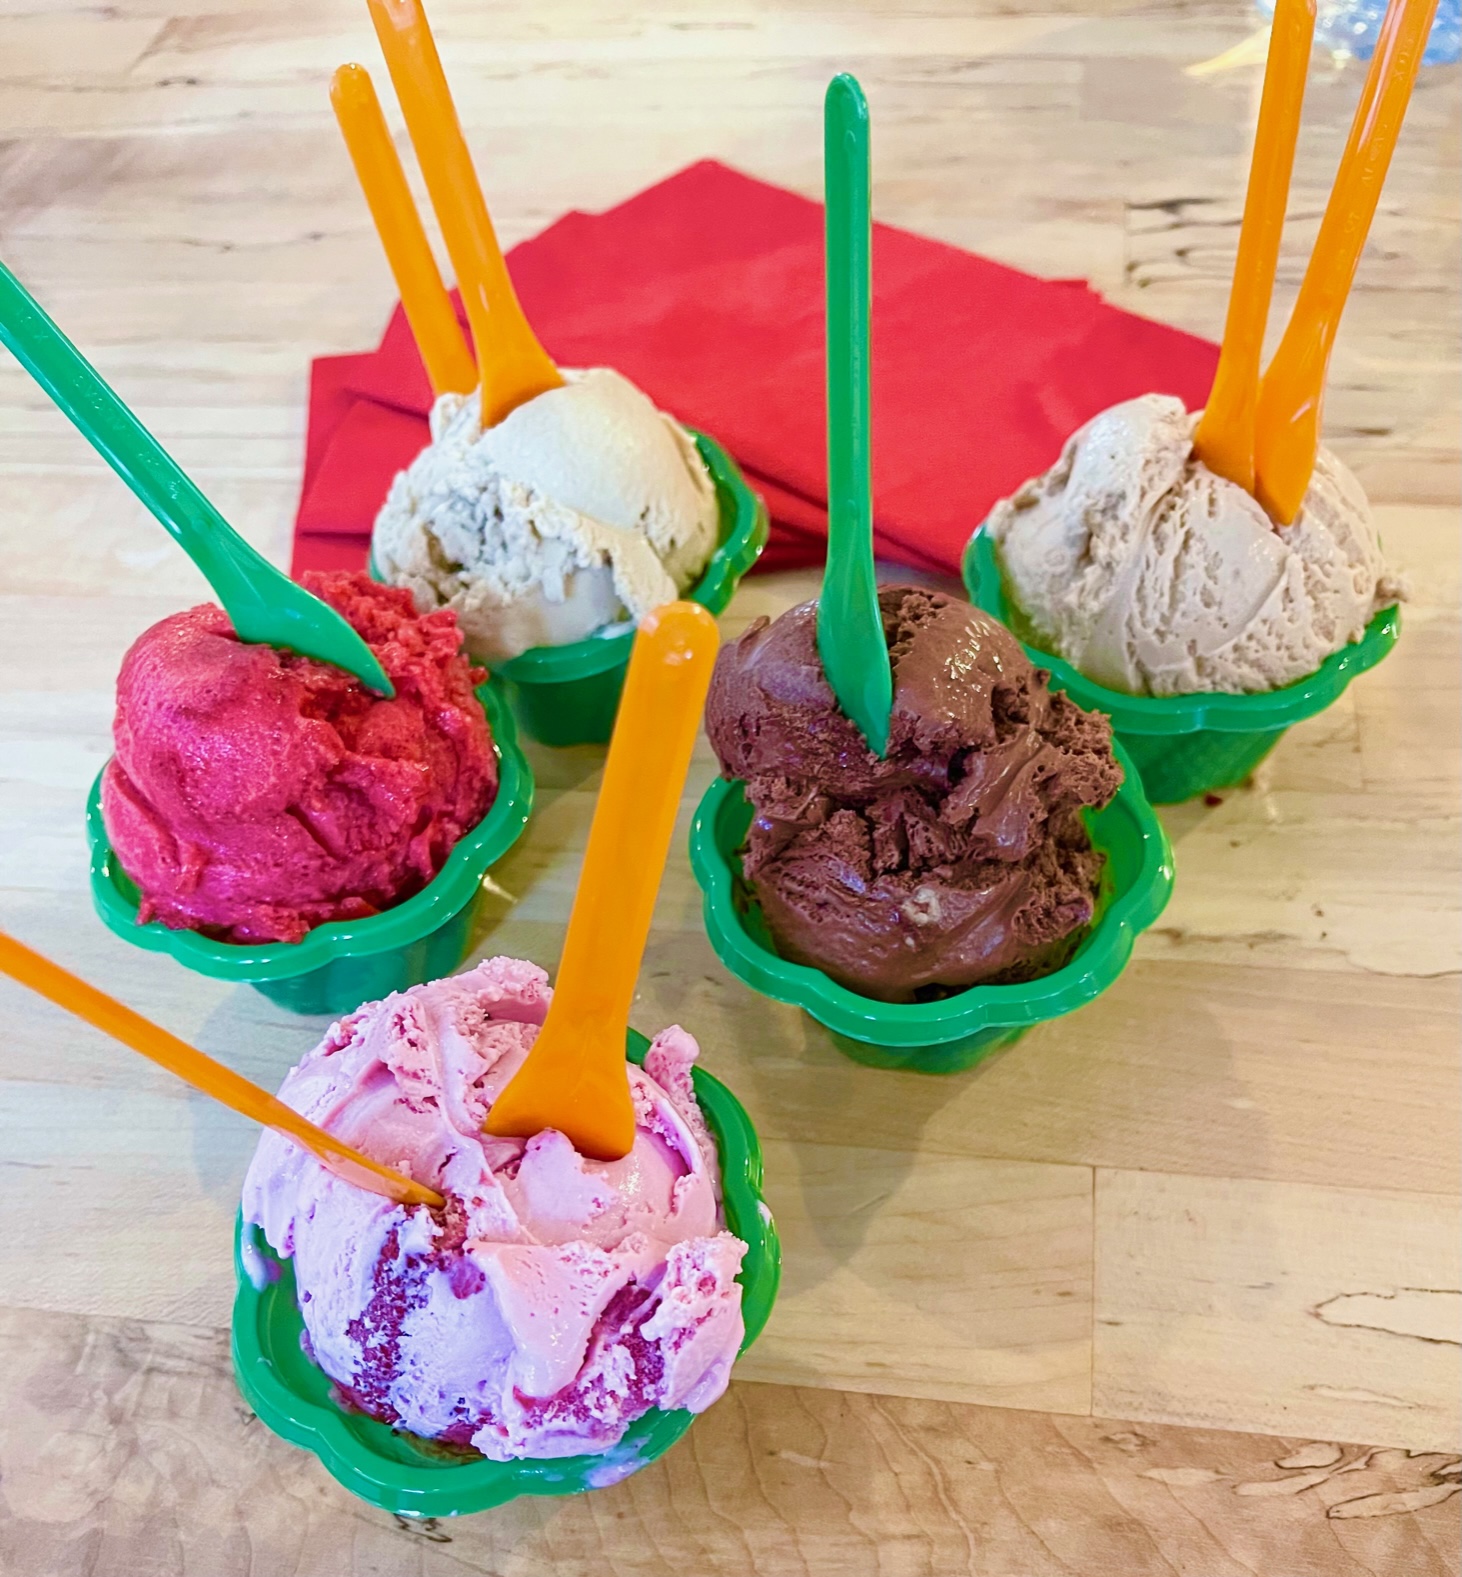 On a light wood table, there are five cups of gelato in green cups with various flavors and differently colored plastic spoons in each cup. Photo by Stephanie Wheatley.